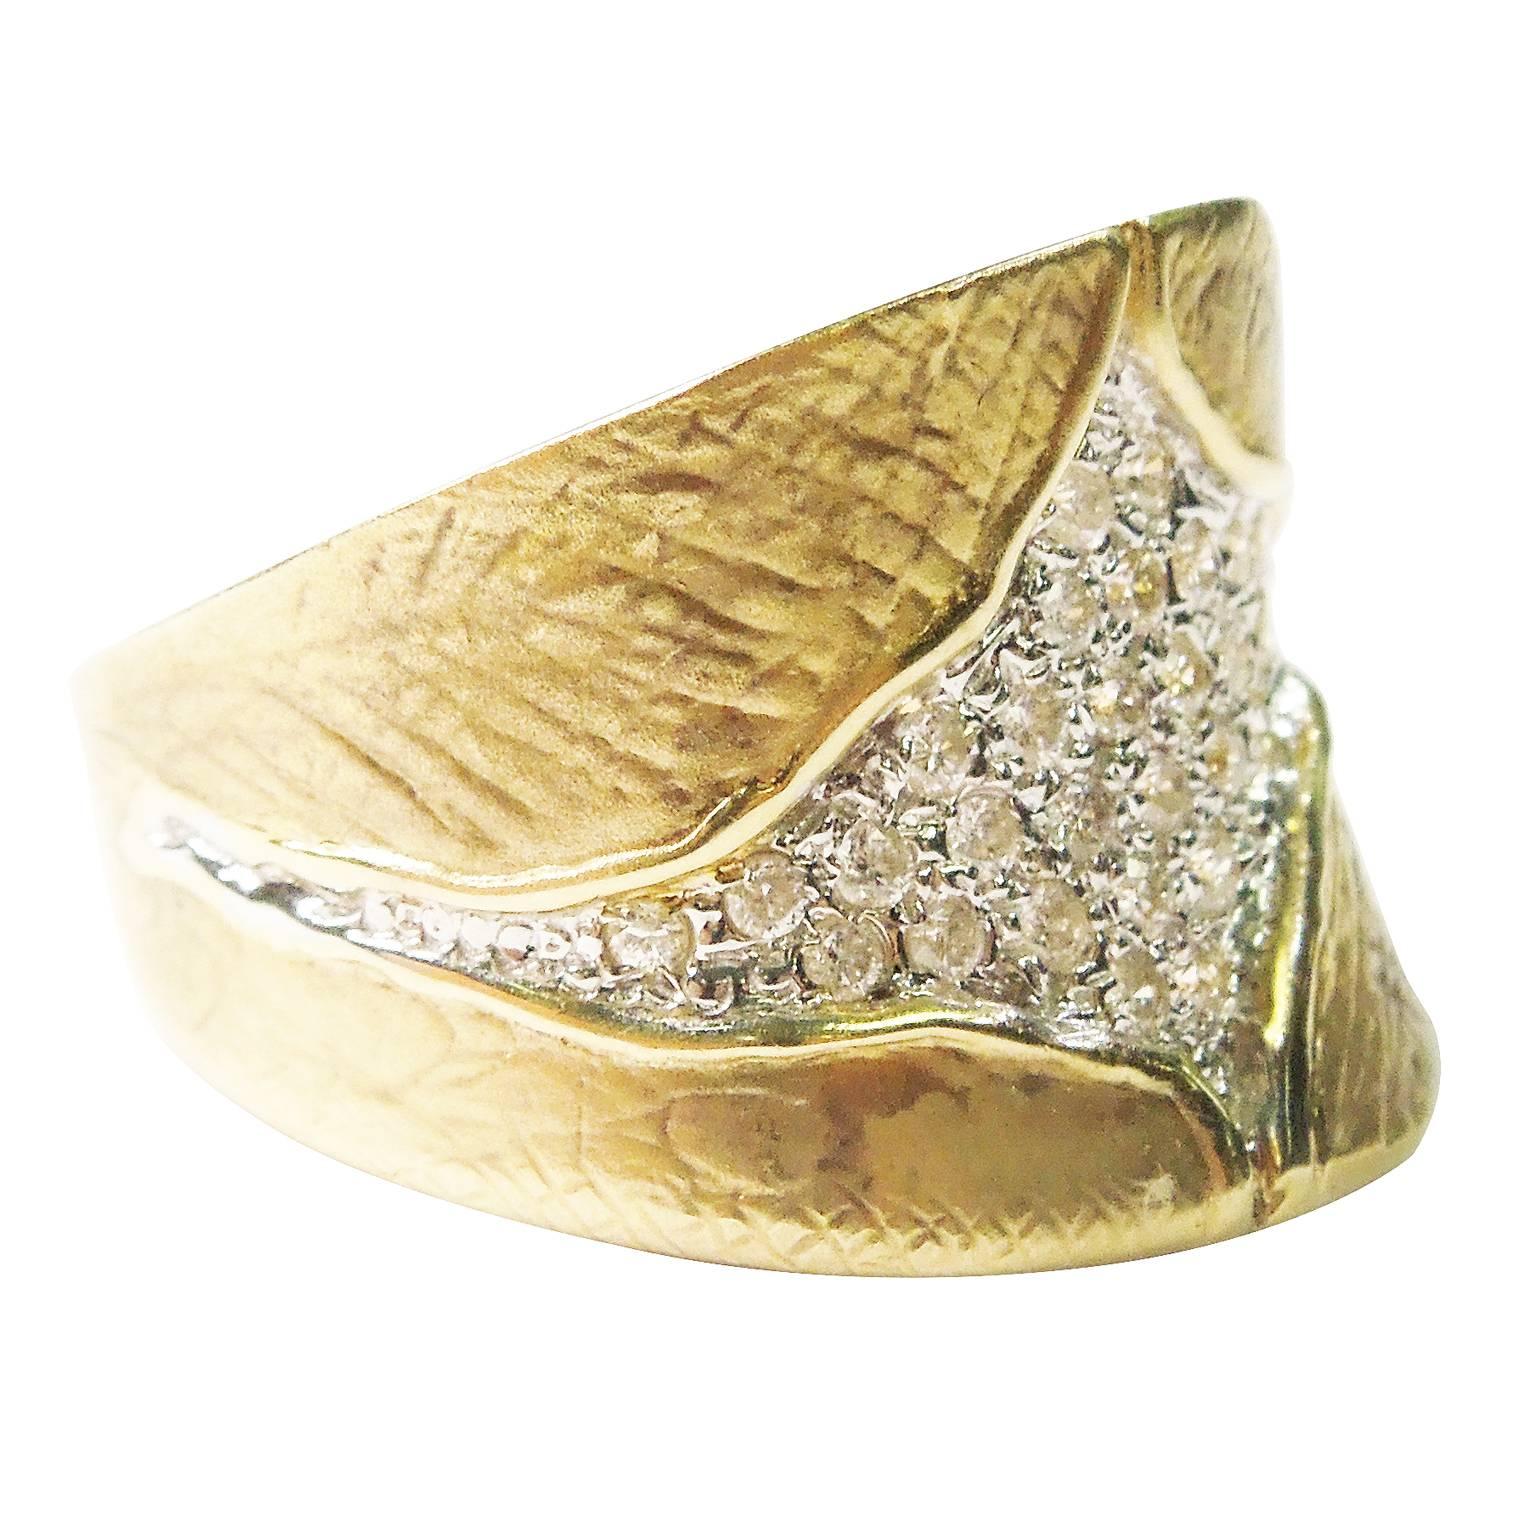 14K Yellow Gold Ring with Pave Set Diamond Center

0.60ct. apprx. Diamonds throughout face of ring

Face of ring is 0.5 inch wide

6.5 grams 14k gold

Currently size 6. Can be sized

Estate